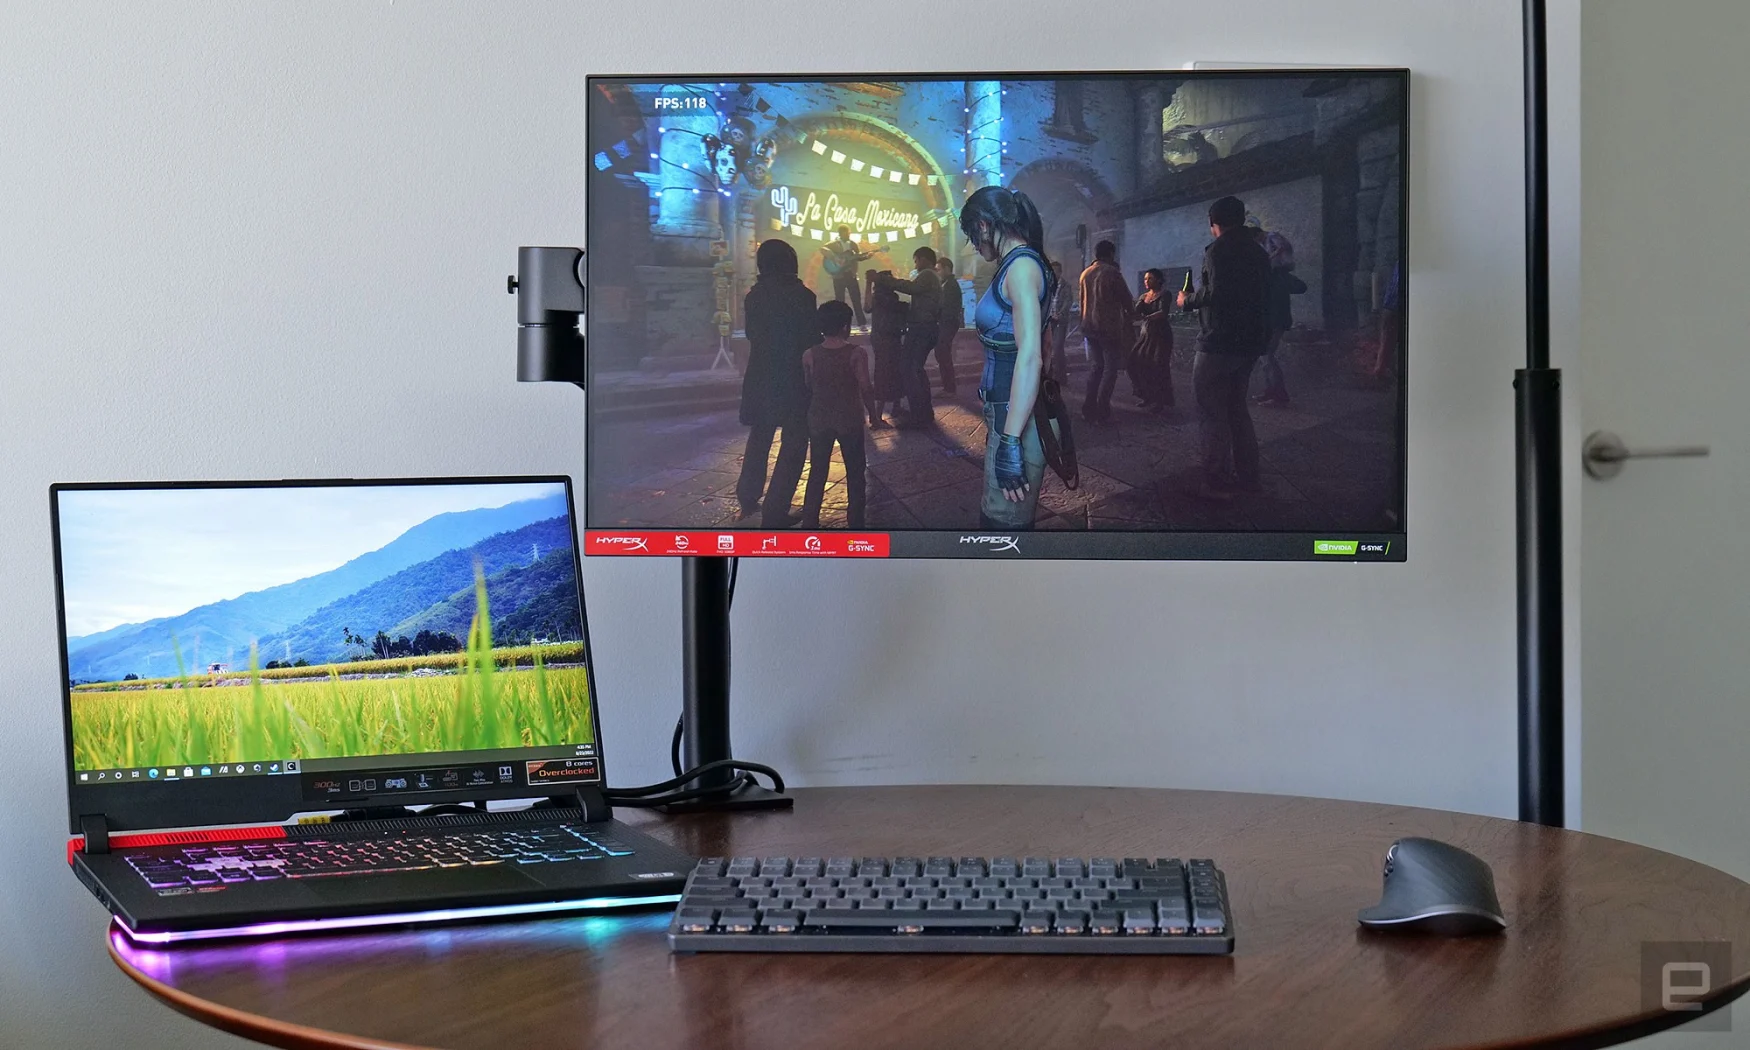 Unlike other monitors, HyperX's Armada gaming monitors eschew the traditional desktop stand in favor of a less cluttered and more customizable monitor arm. 